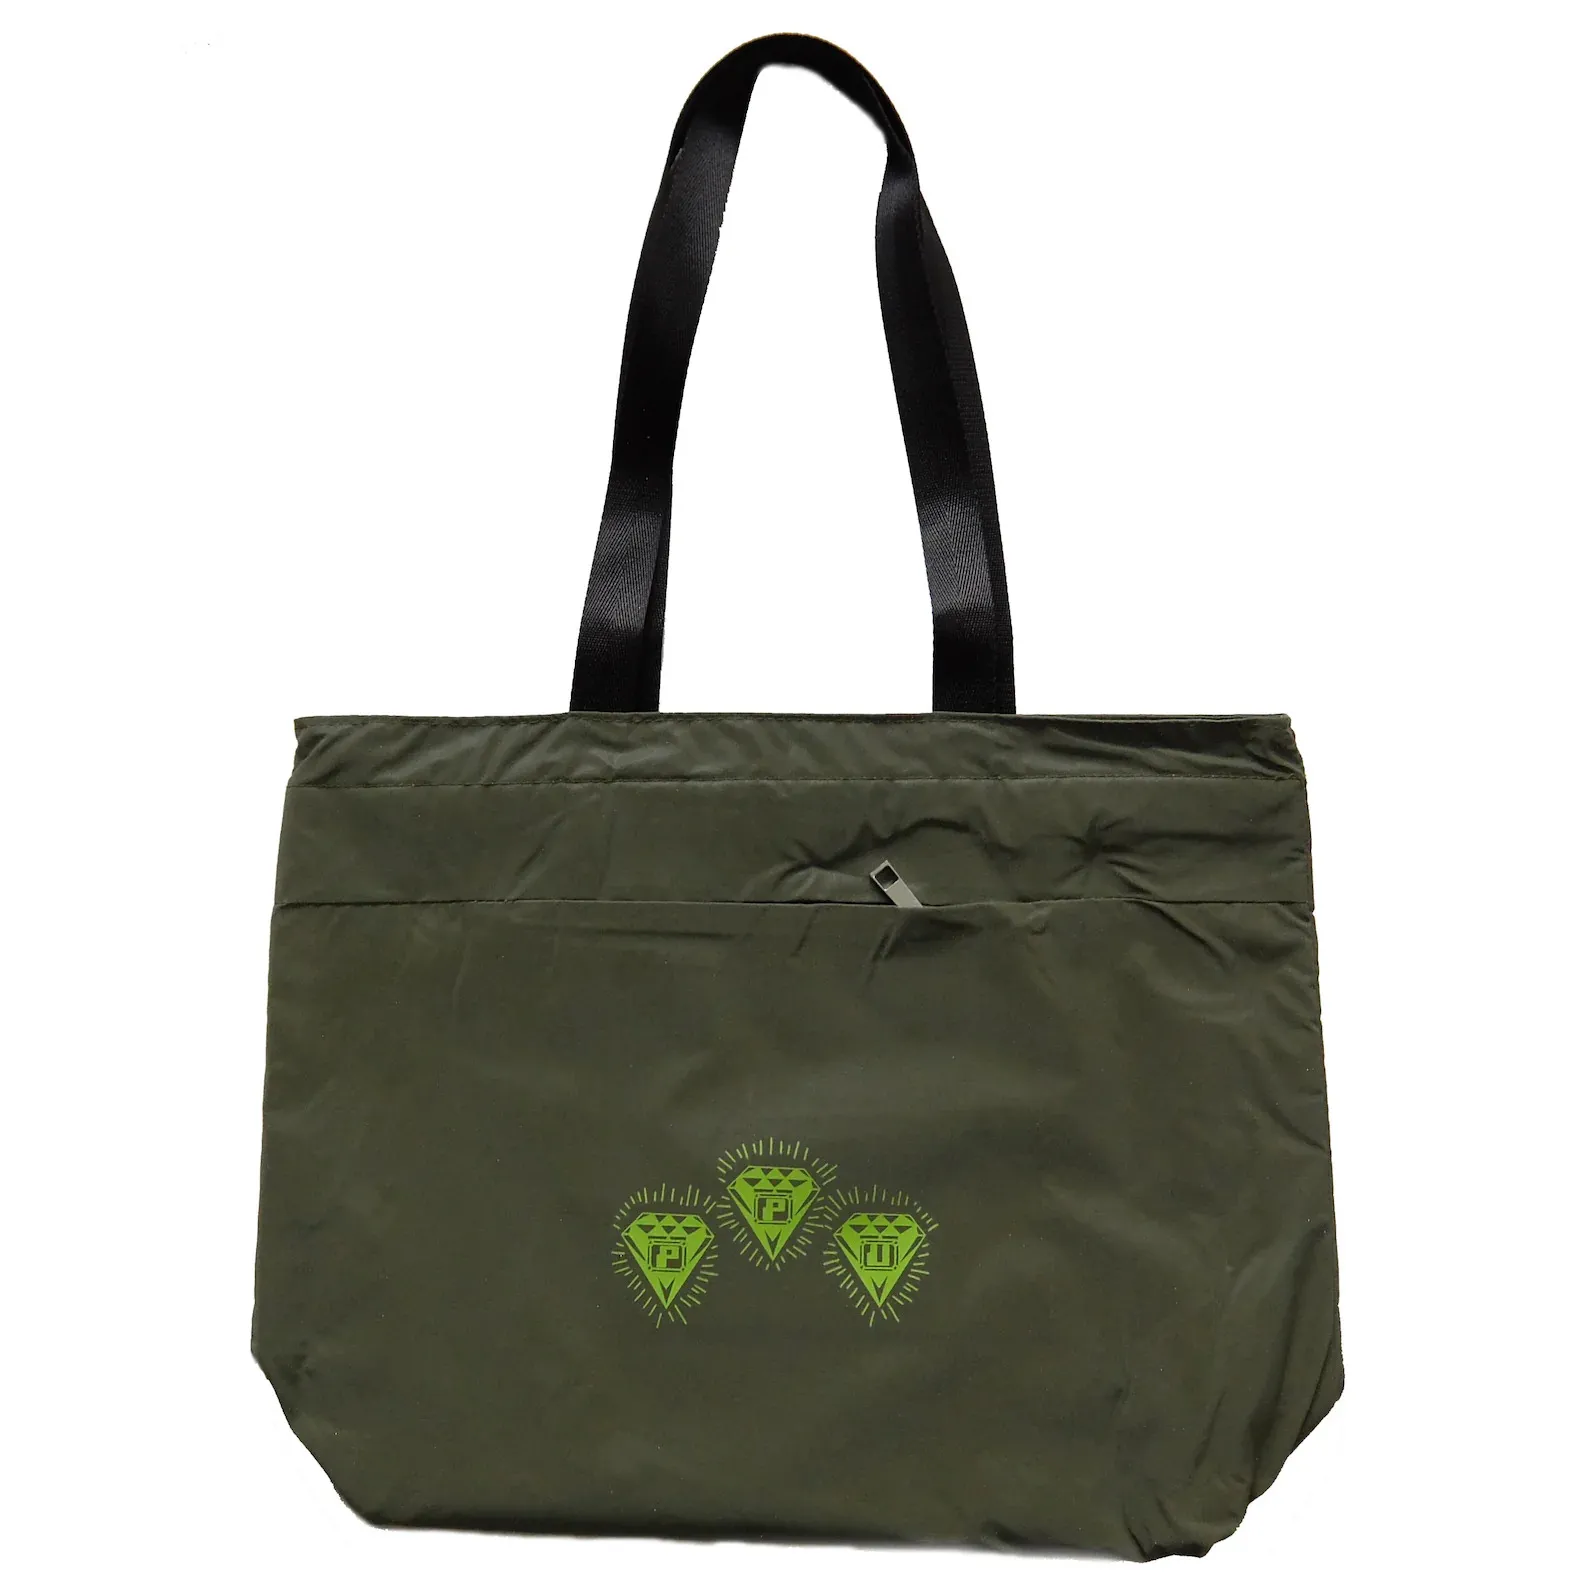 PPU - PPU "Cold Storage" Padded Record Tote Cooler Bag : BAG